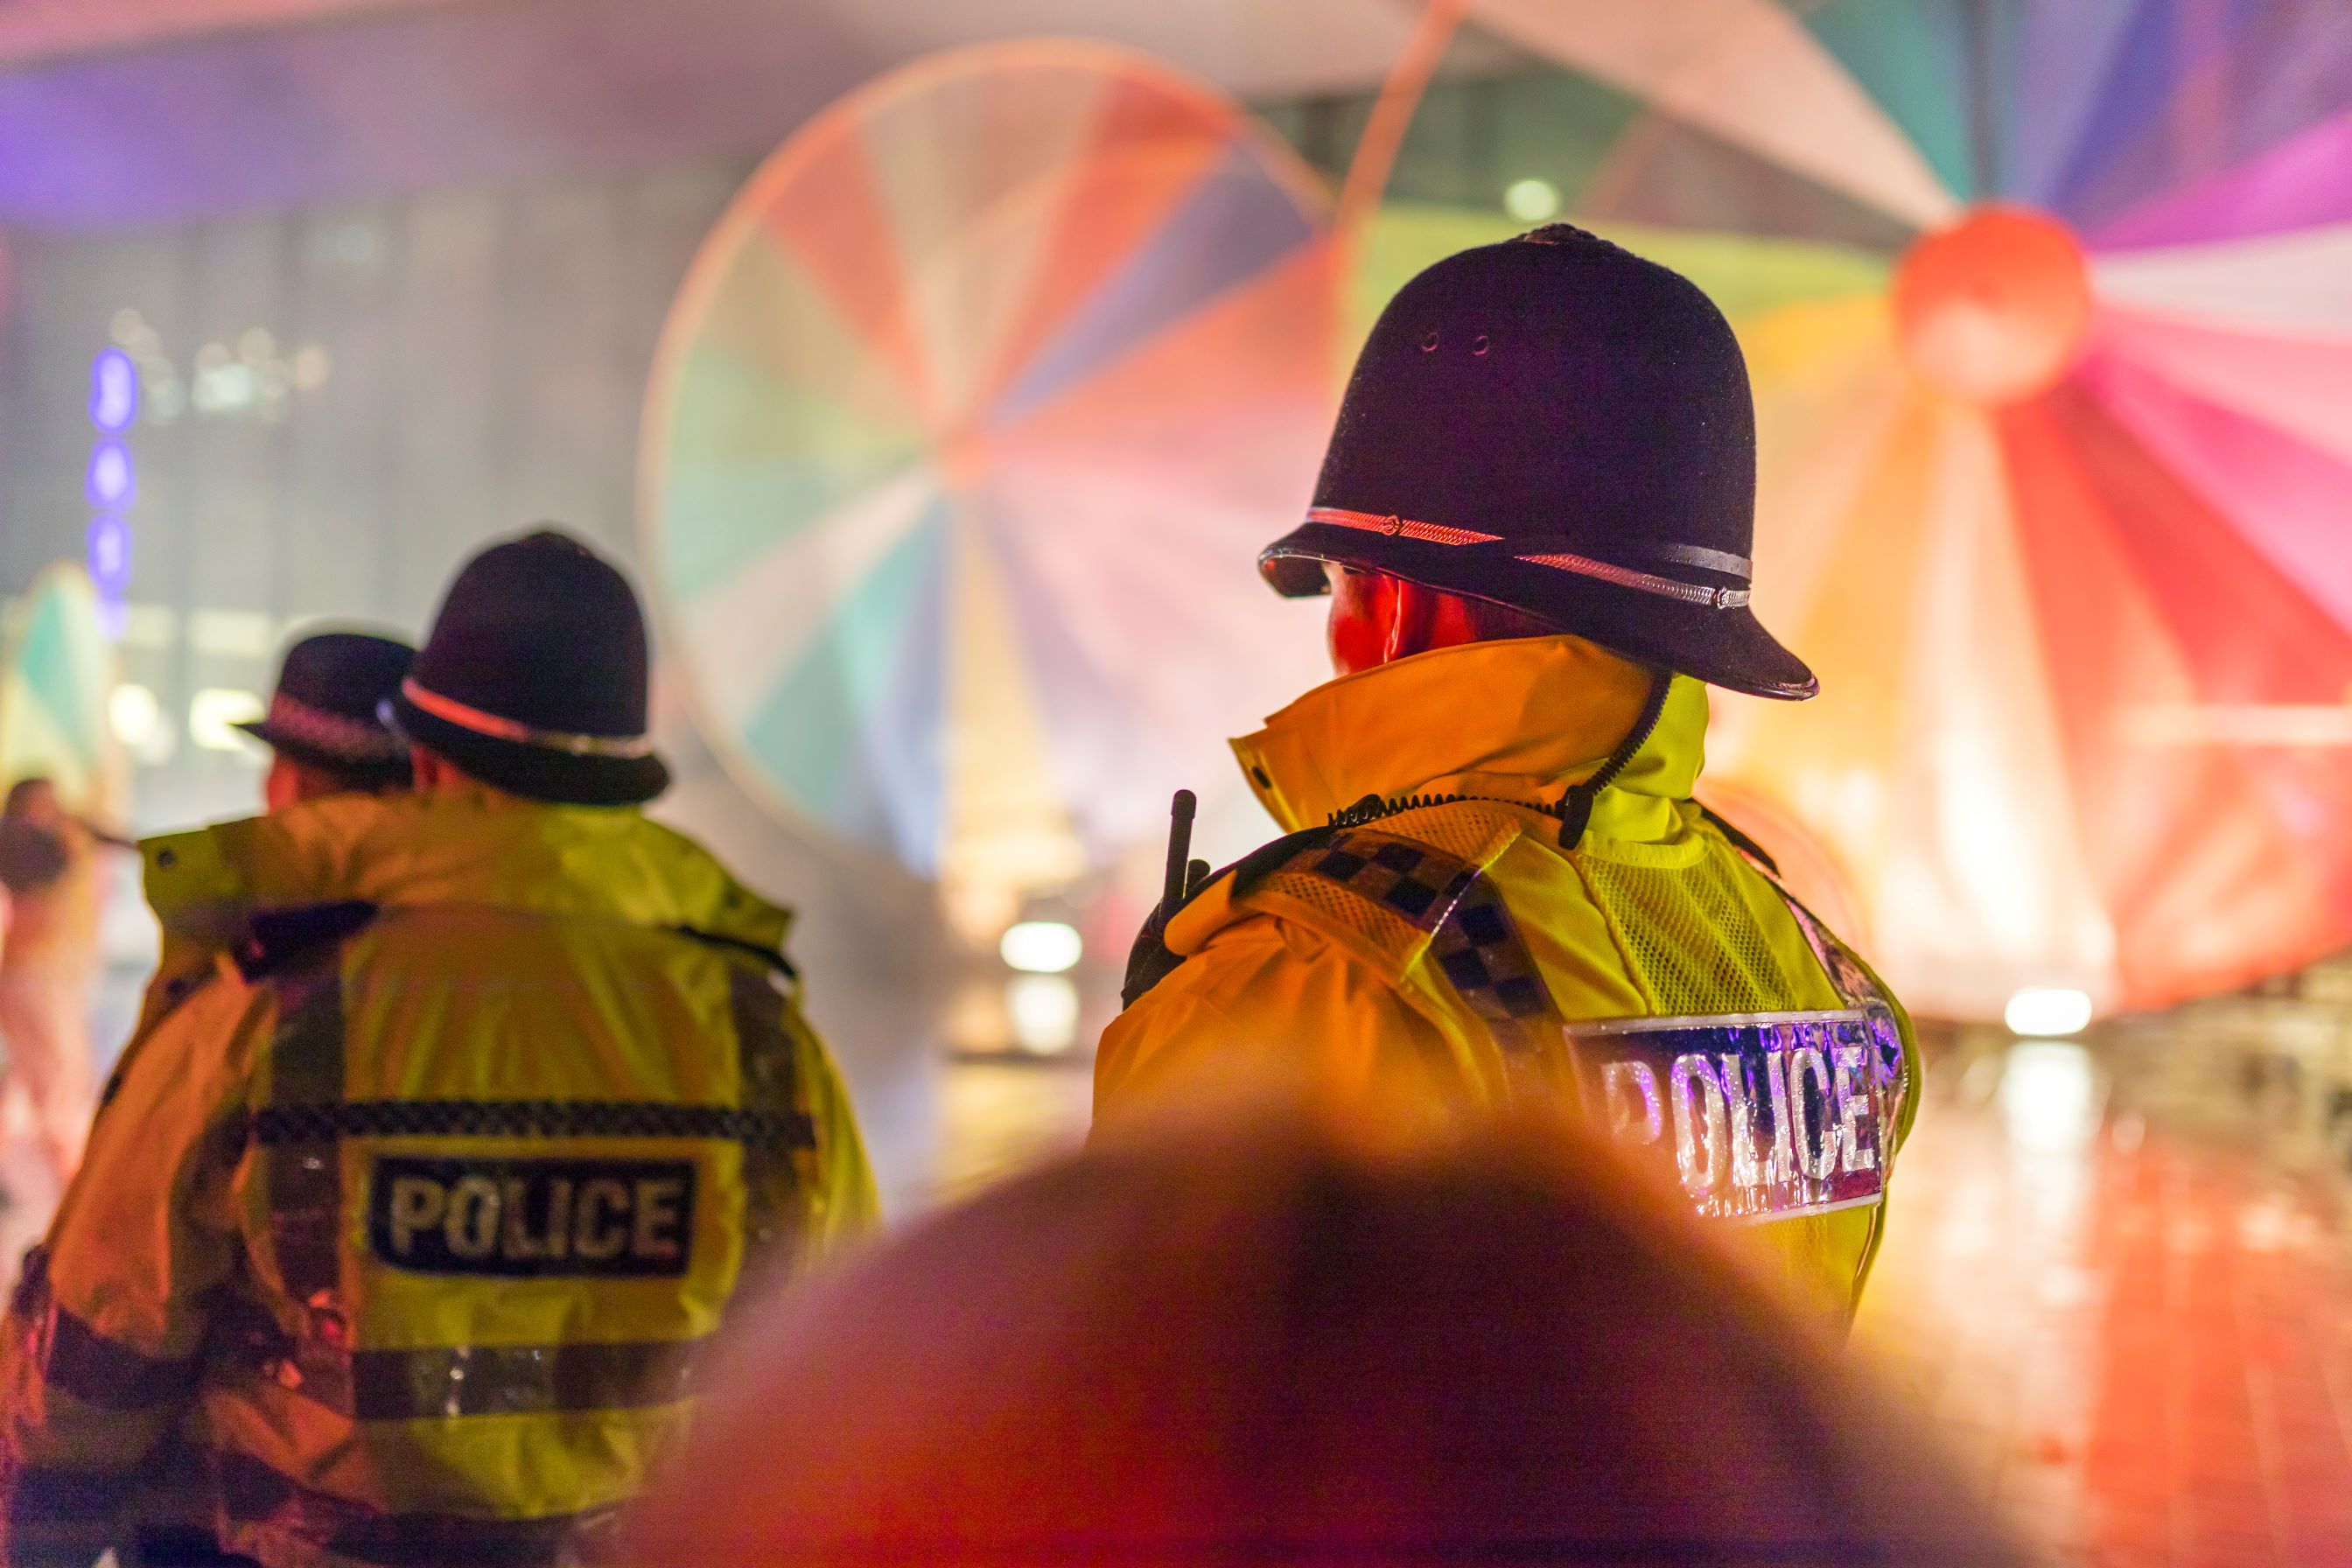 UK police at a vibrant community event